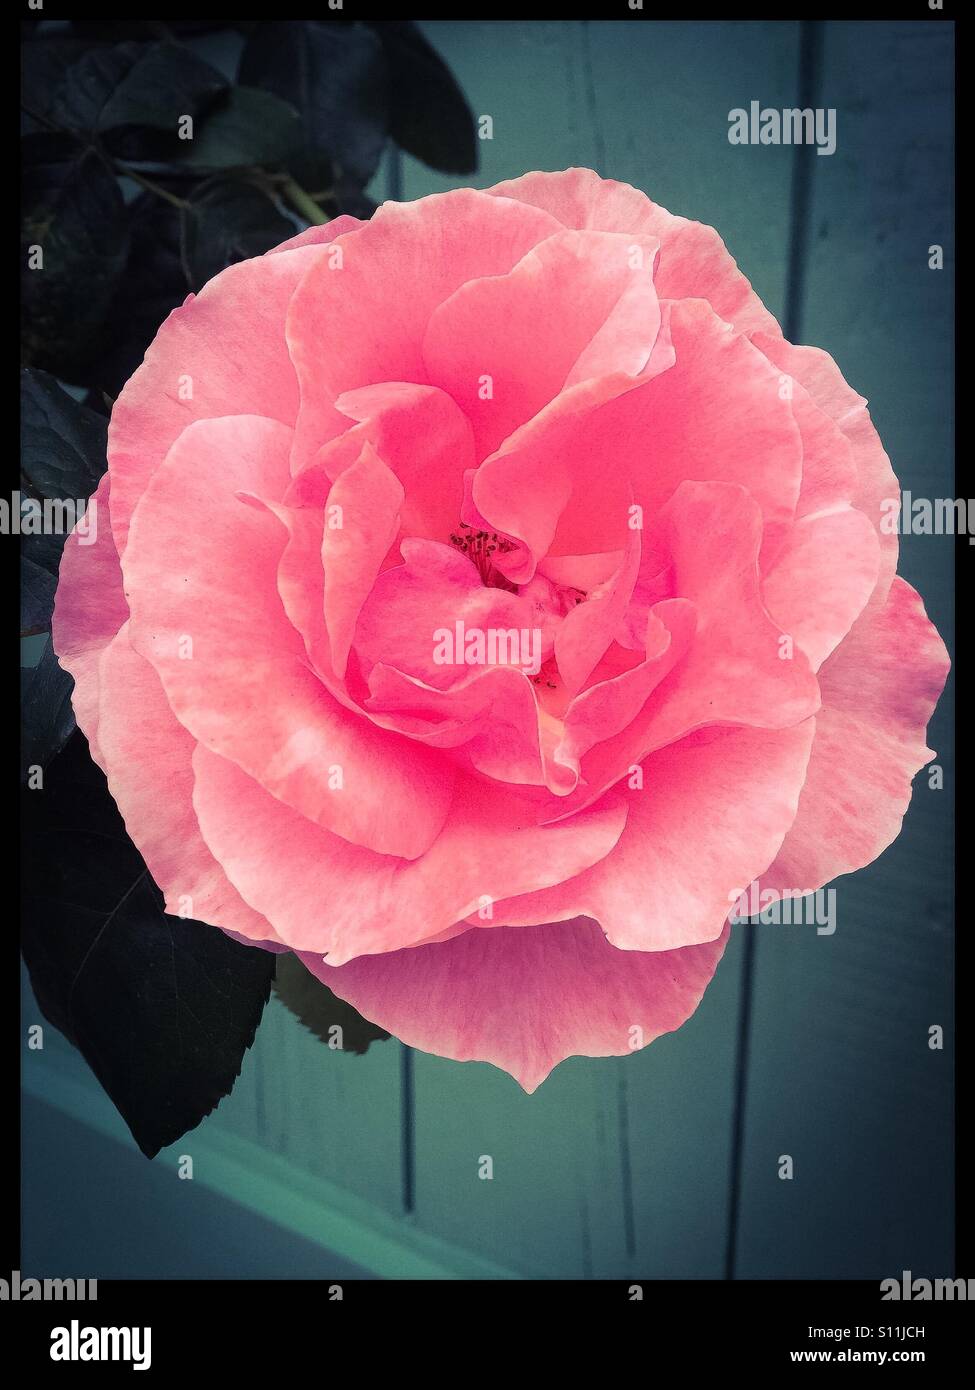 Pale pink rose. Stock Photo